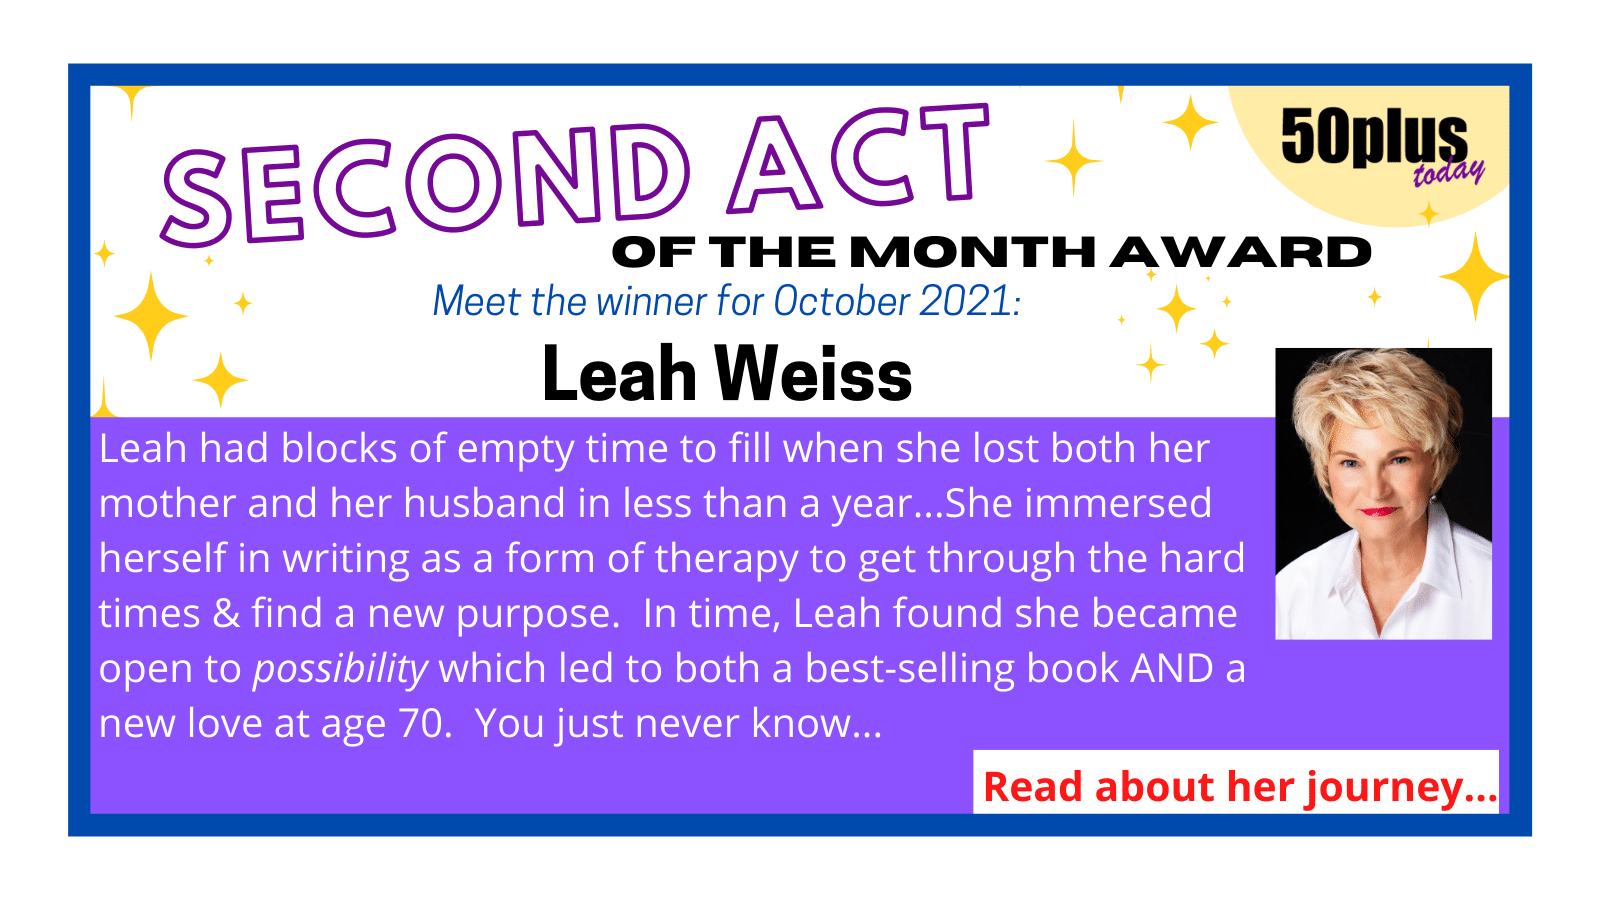 LEAH WEISS AUTHOR